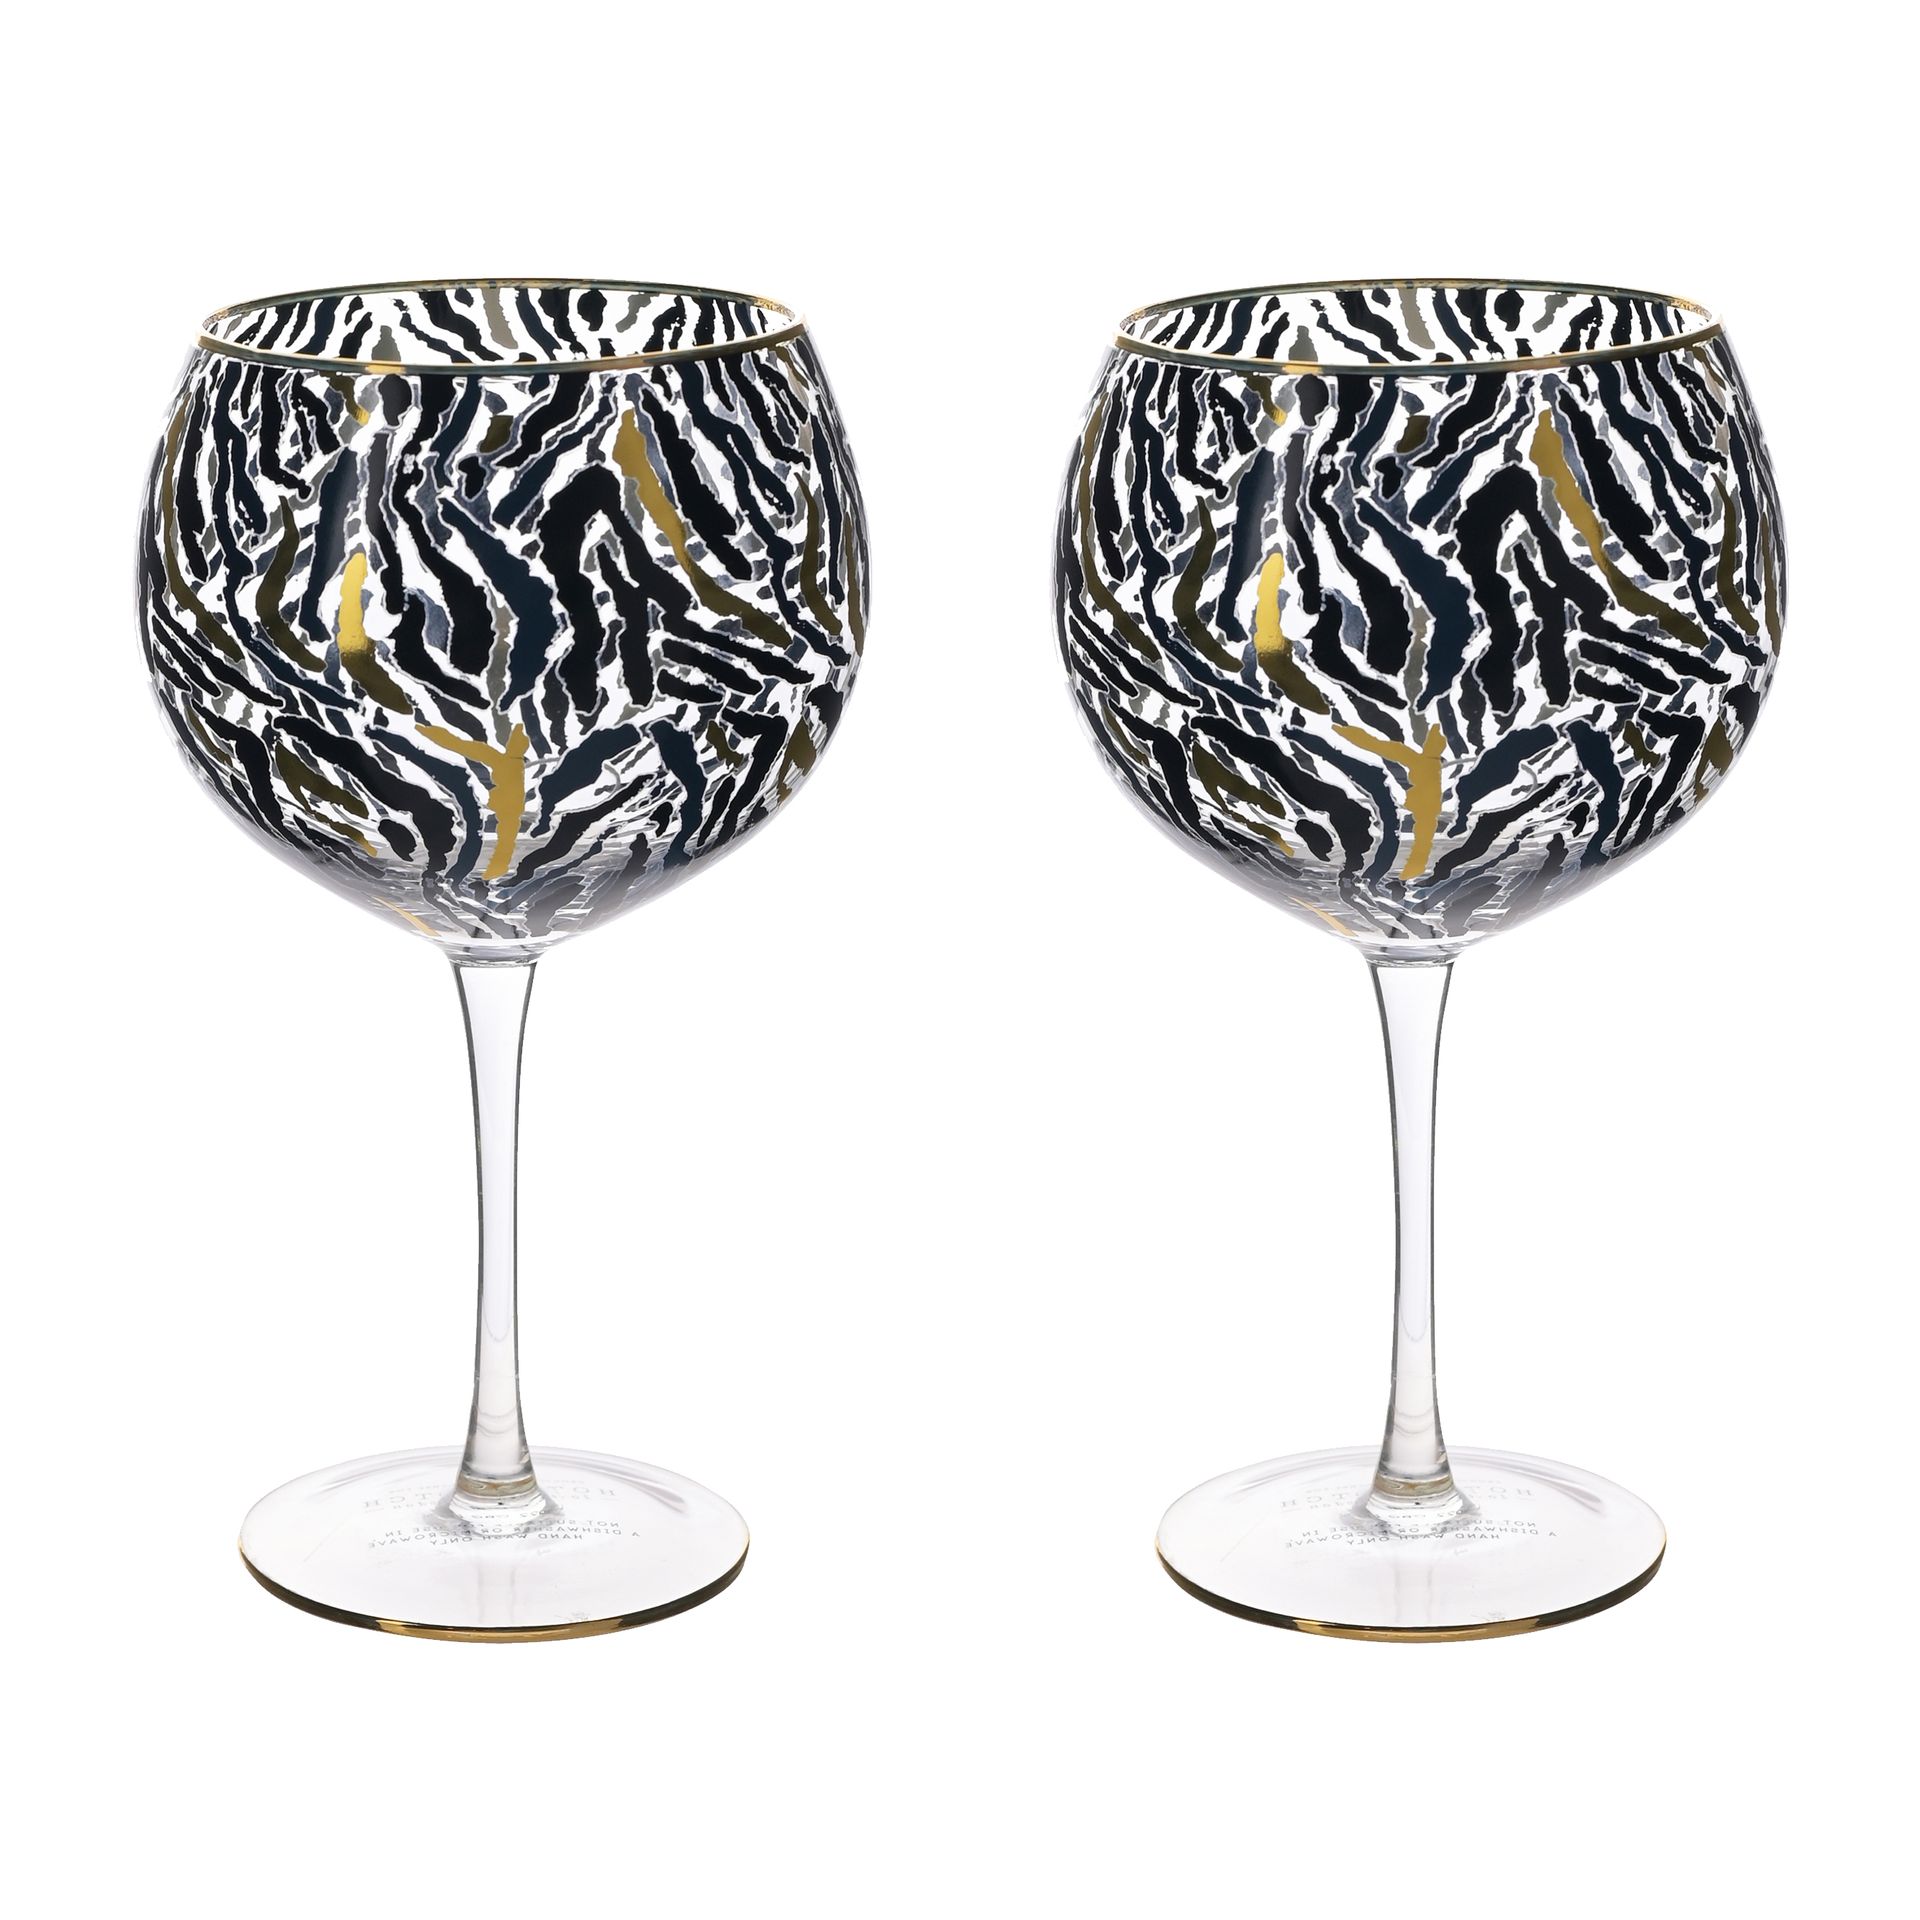 &Quirky Set of 2 Zebra Printed Gin Glasses